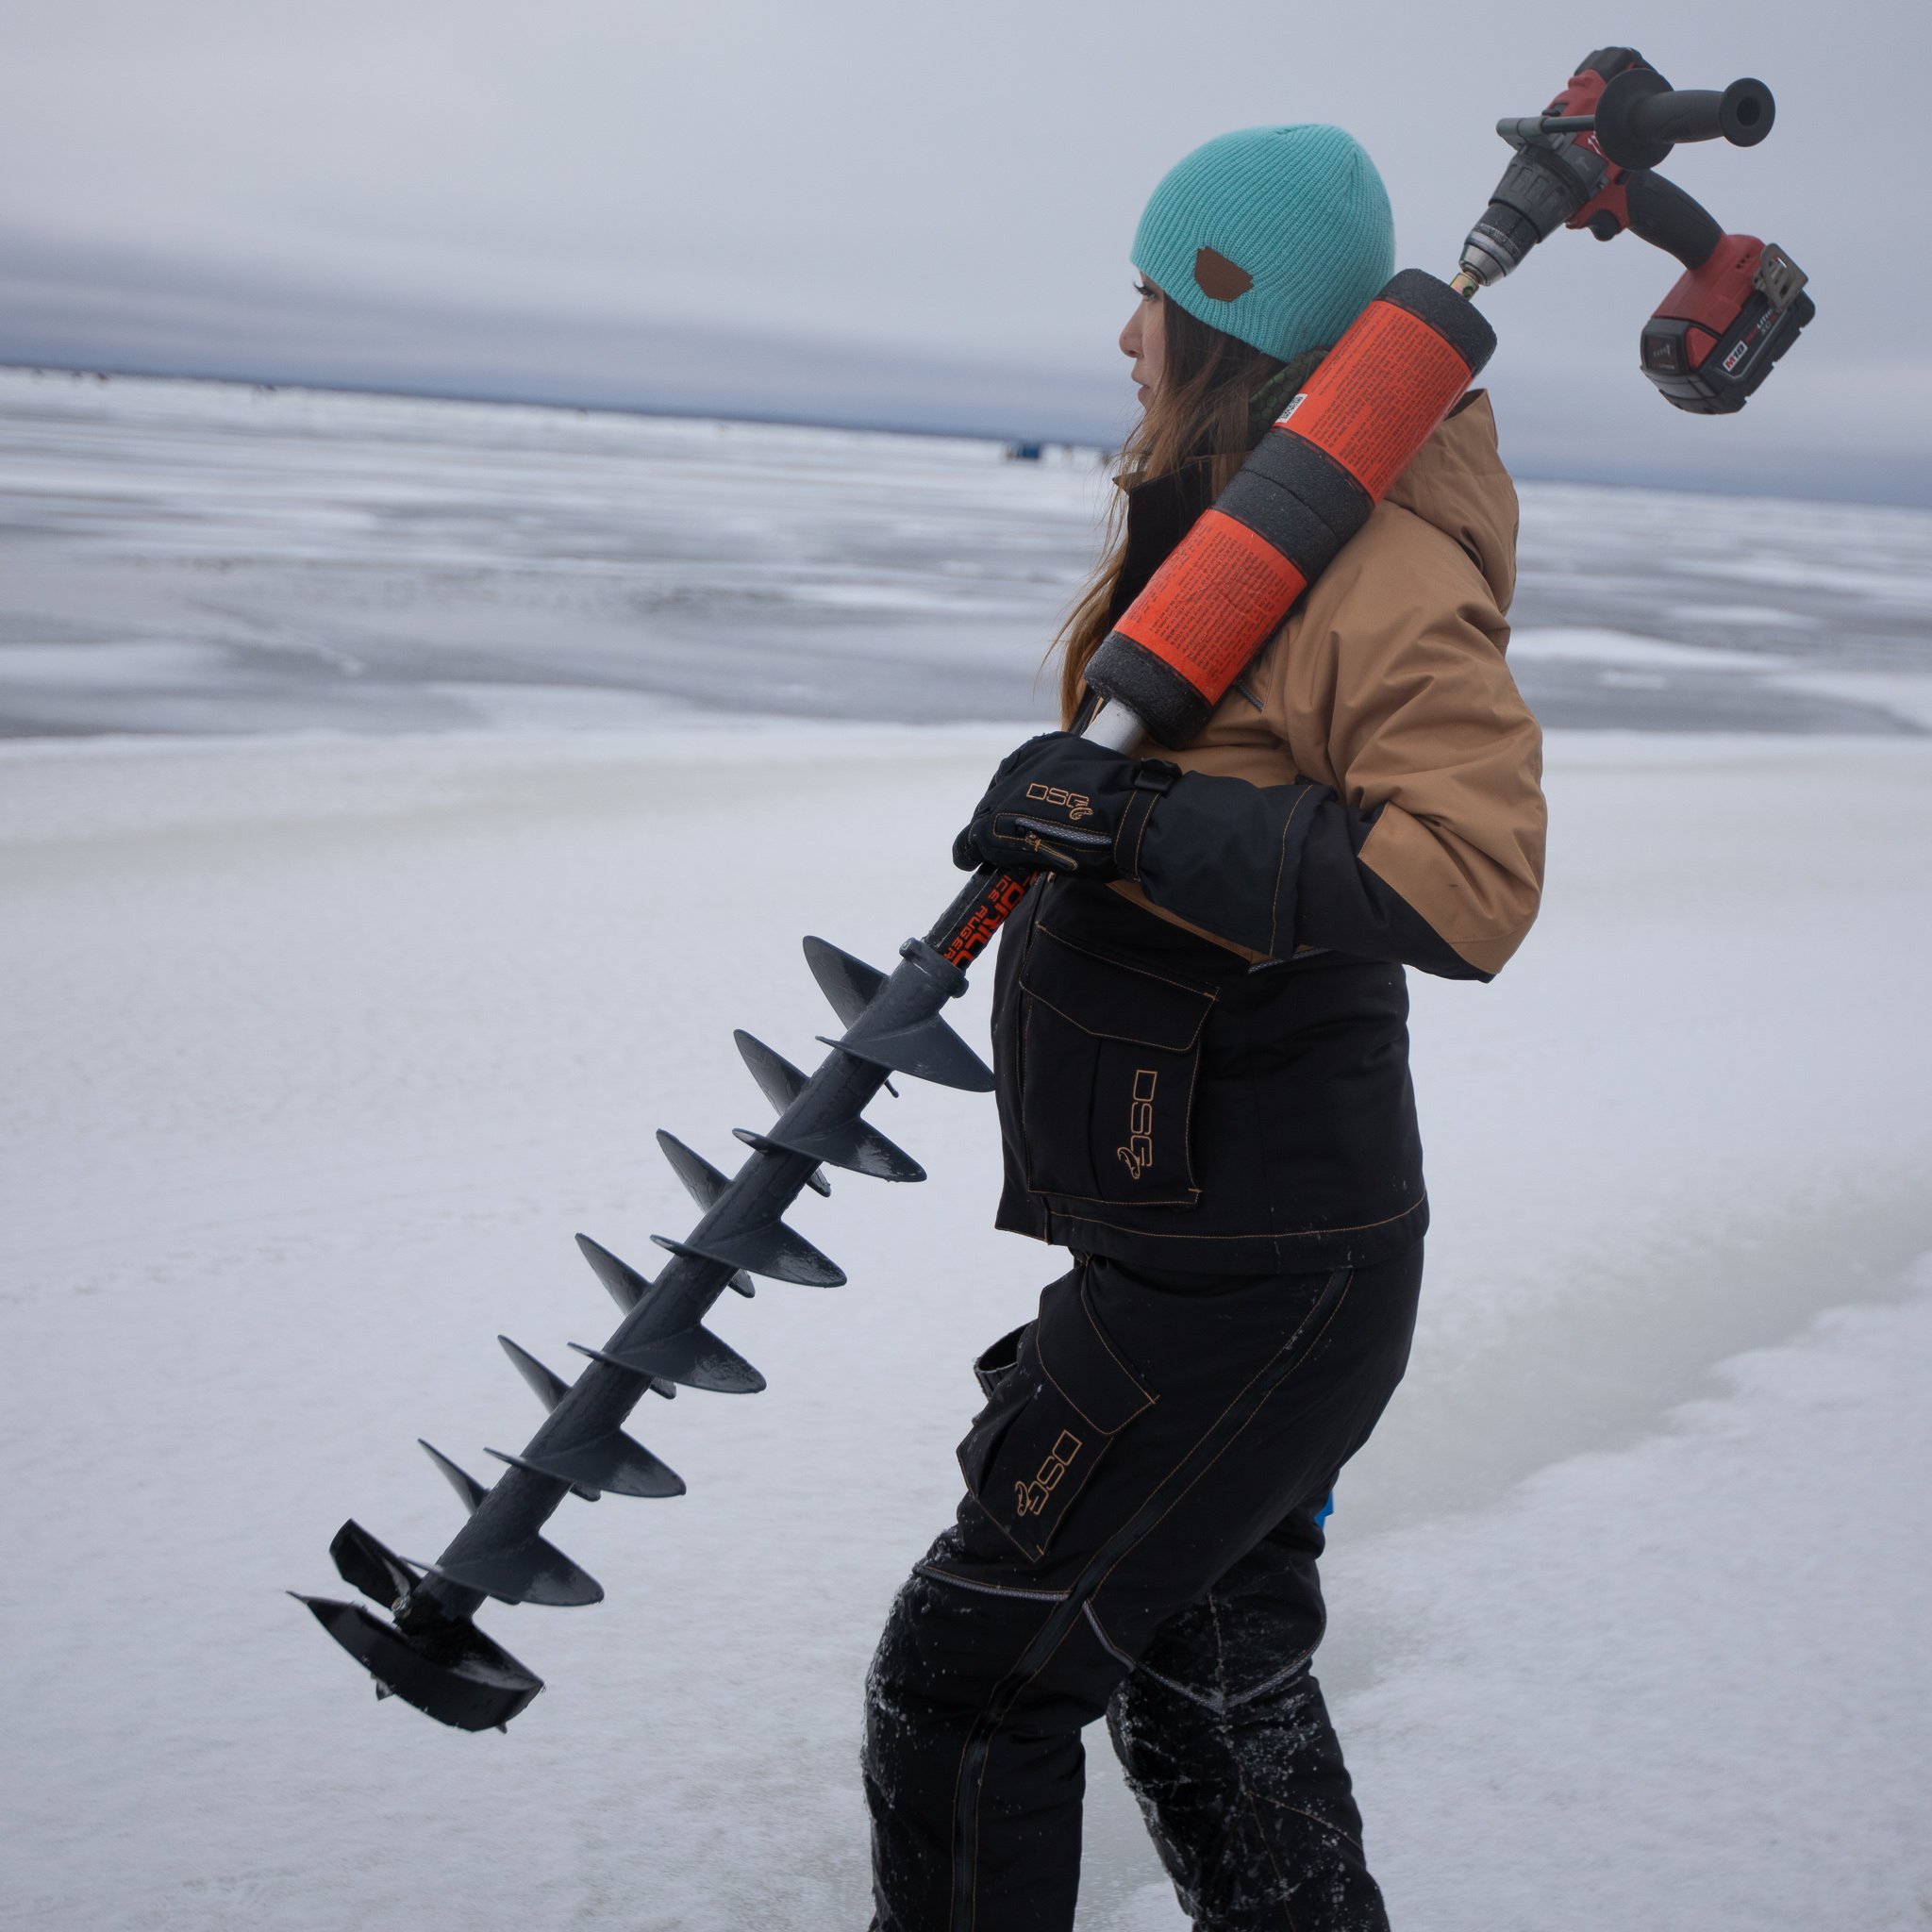 The KDrill Ice Auger System Makes Drilling Holes EASY